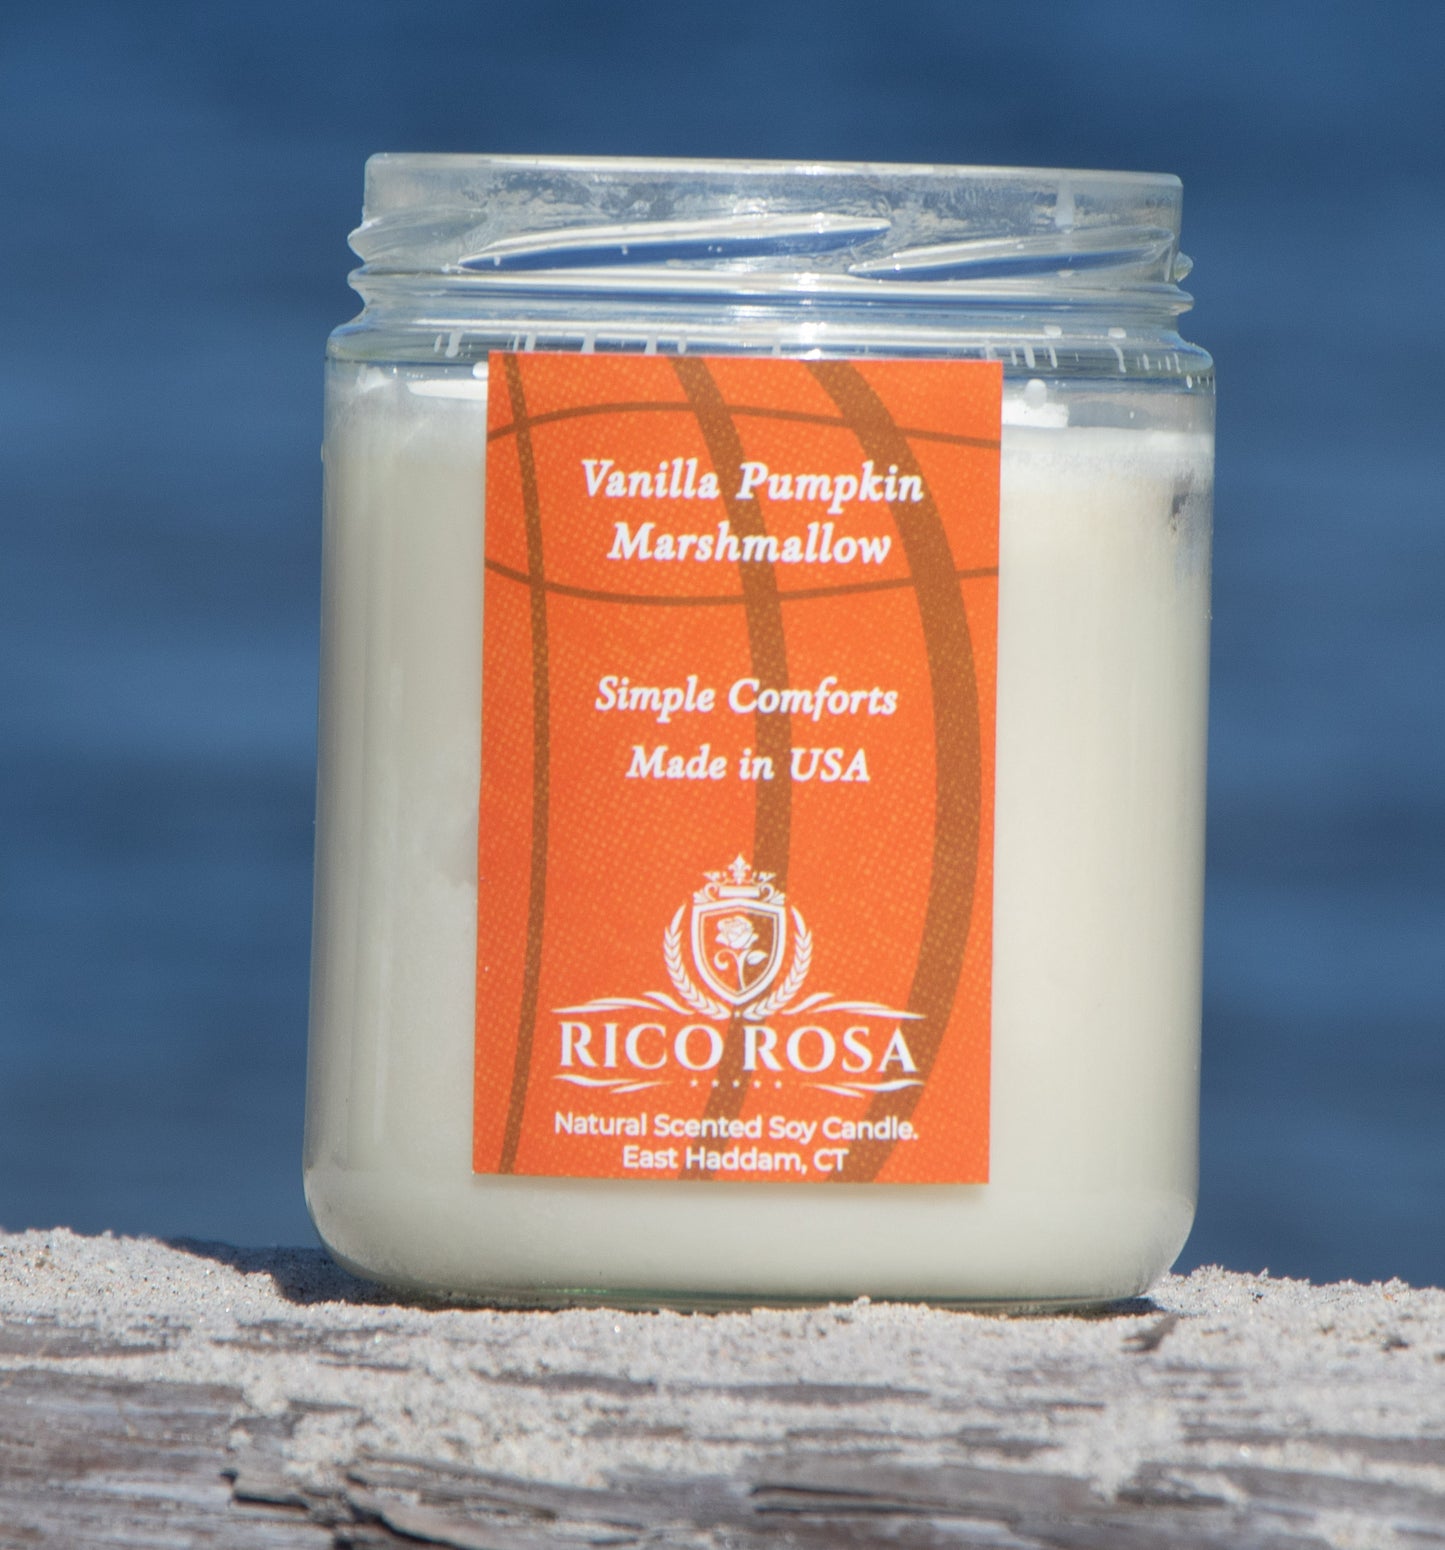 Vanilla Pumpkin Marshmallow Natural Scented Soy Candle